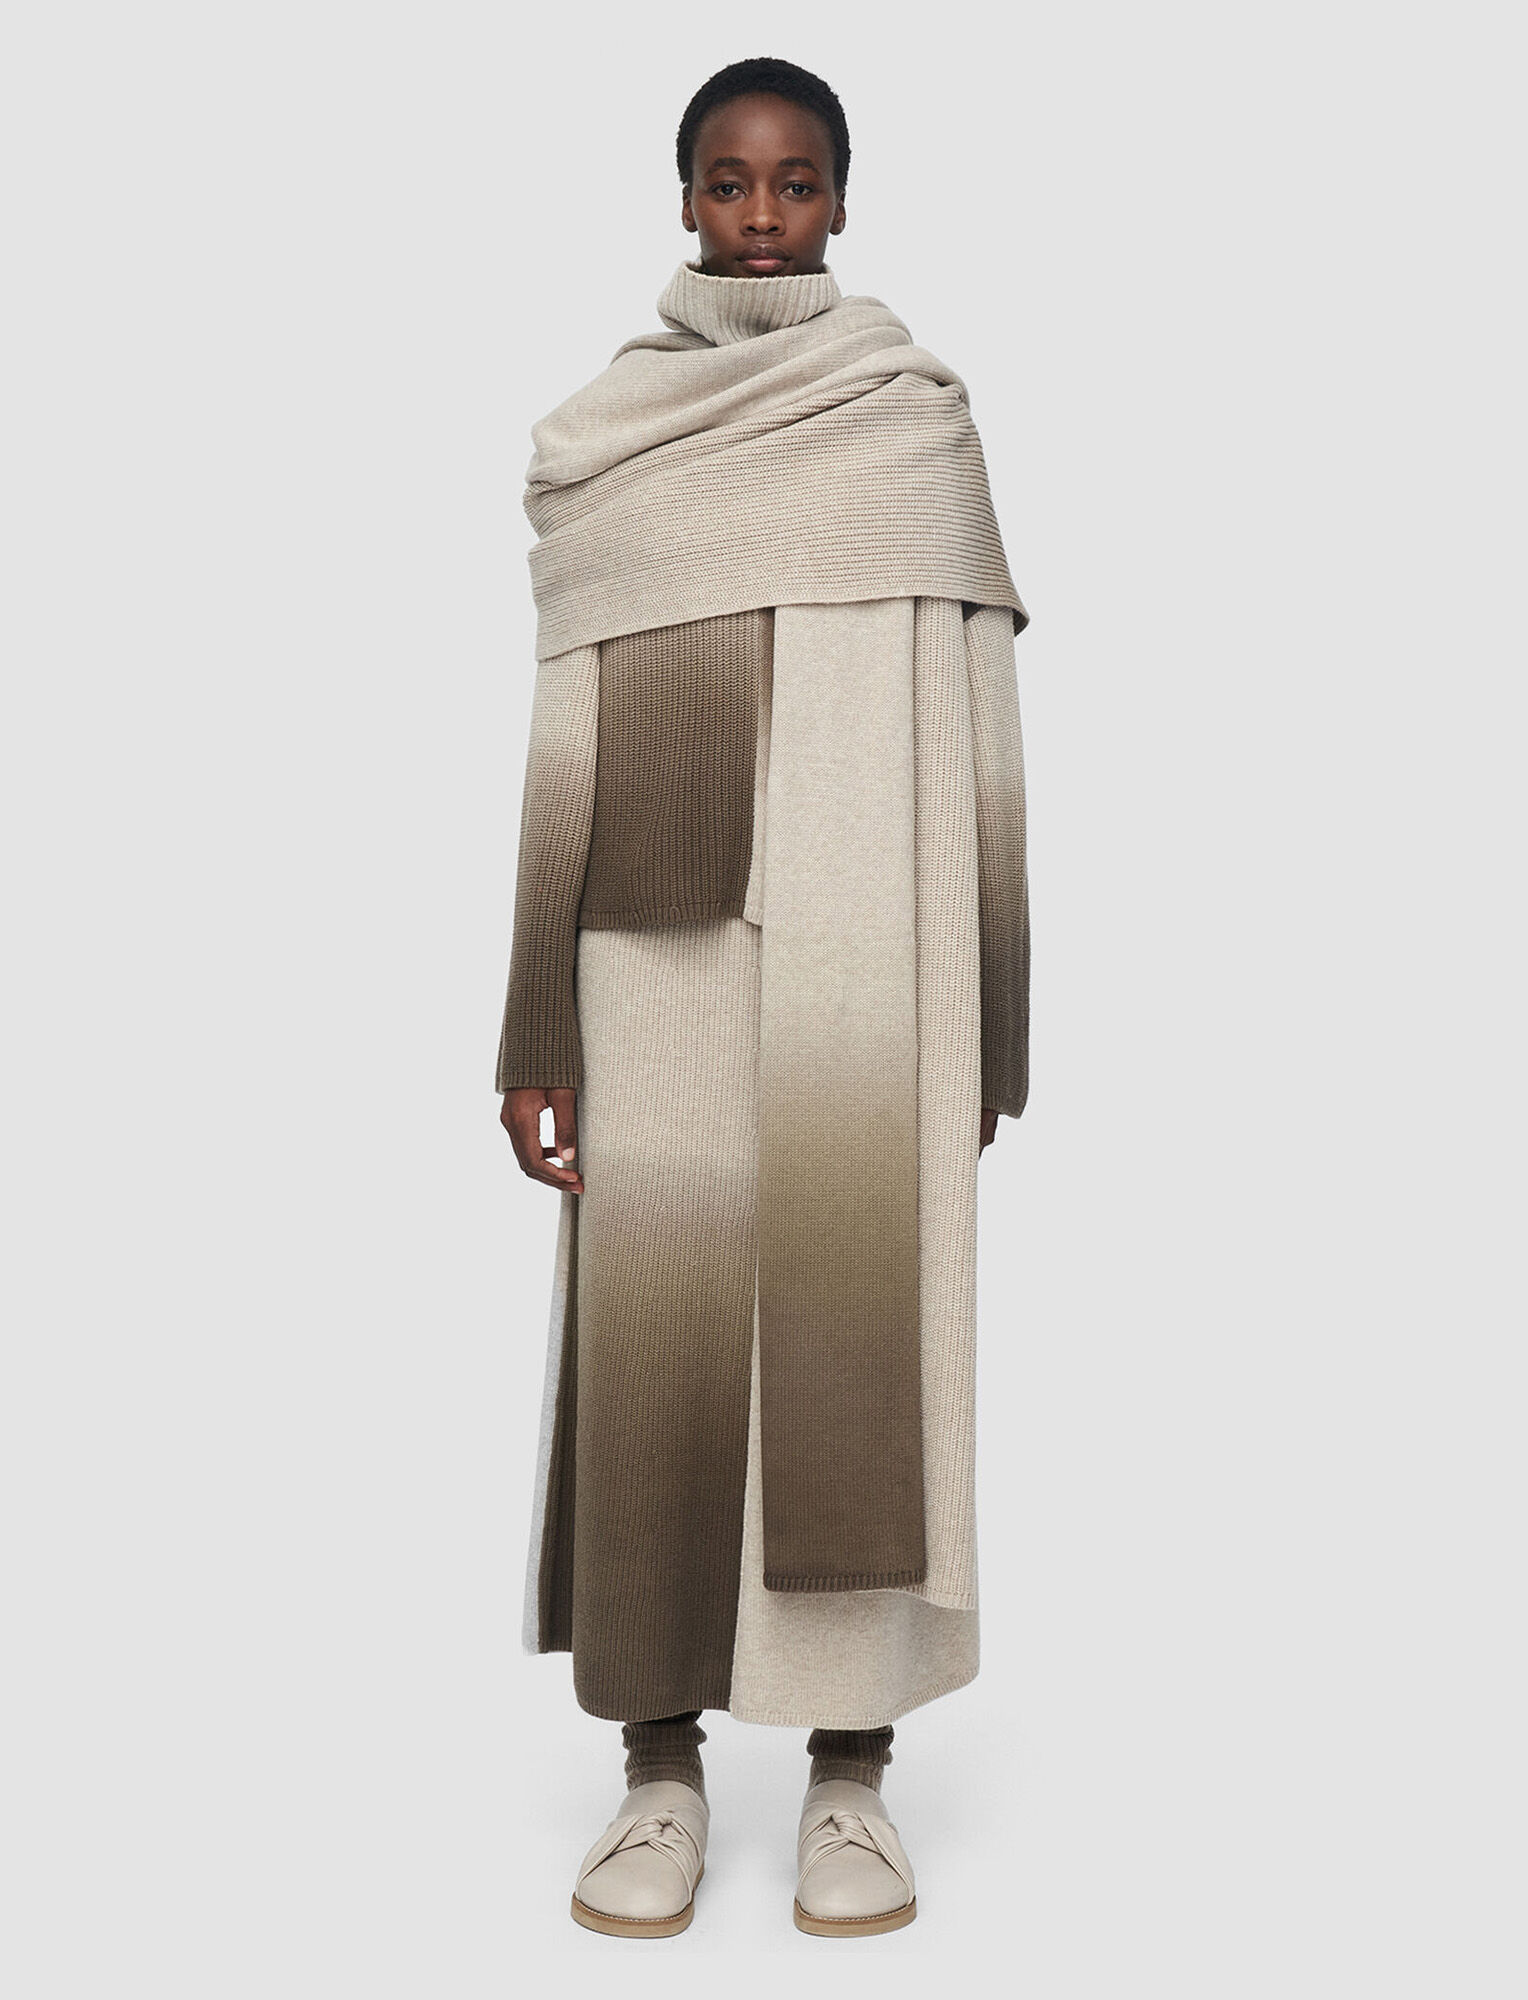 Joseph, Painted Wool Cashmere Scarf, in Cobble Stone